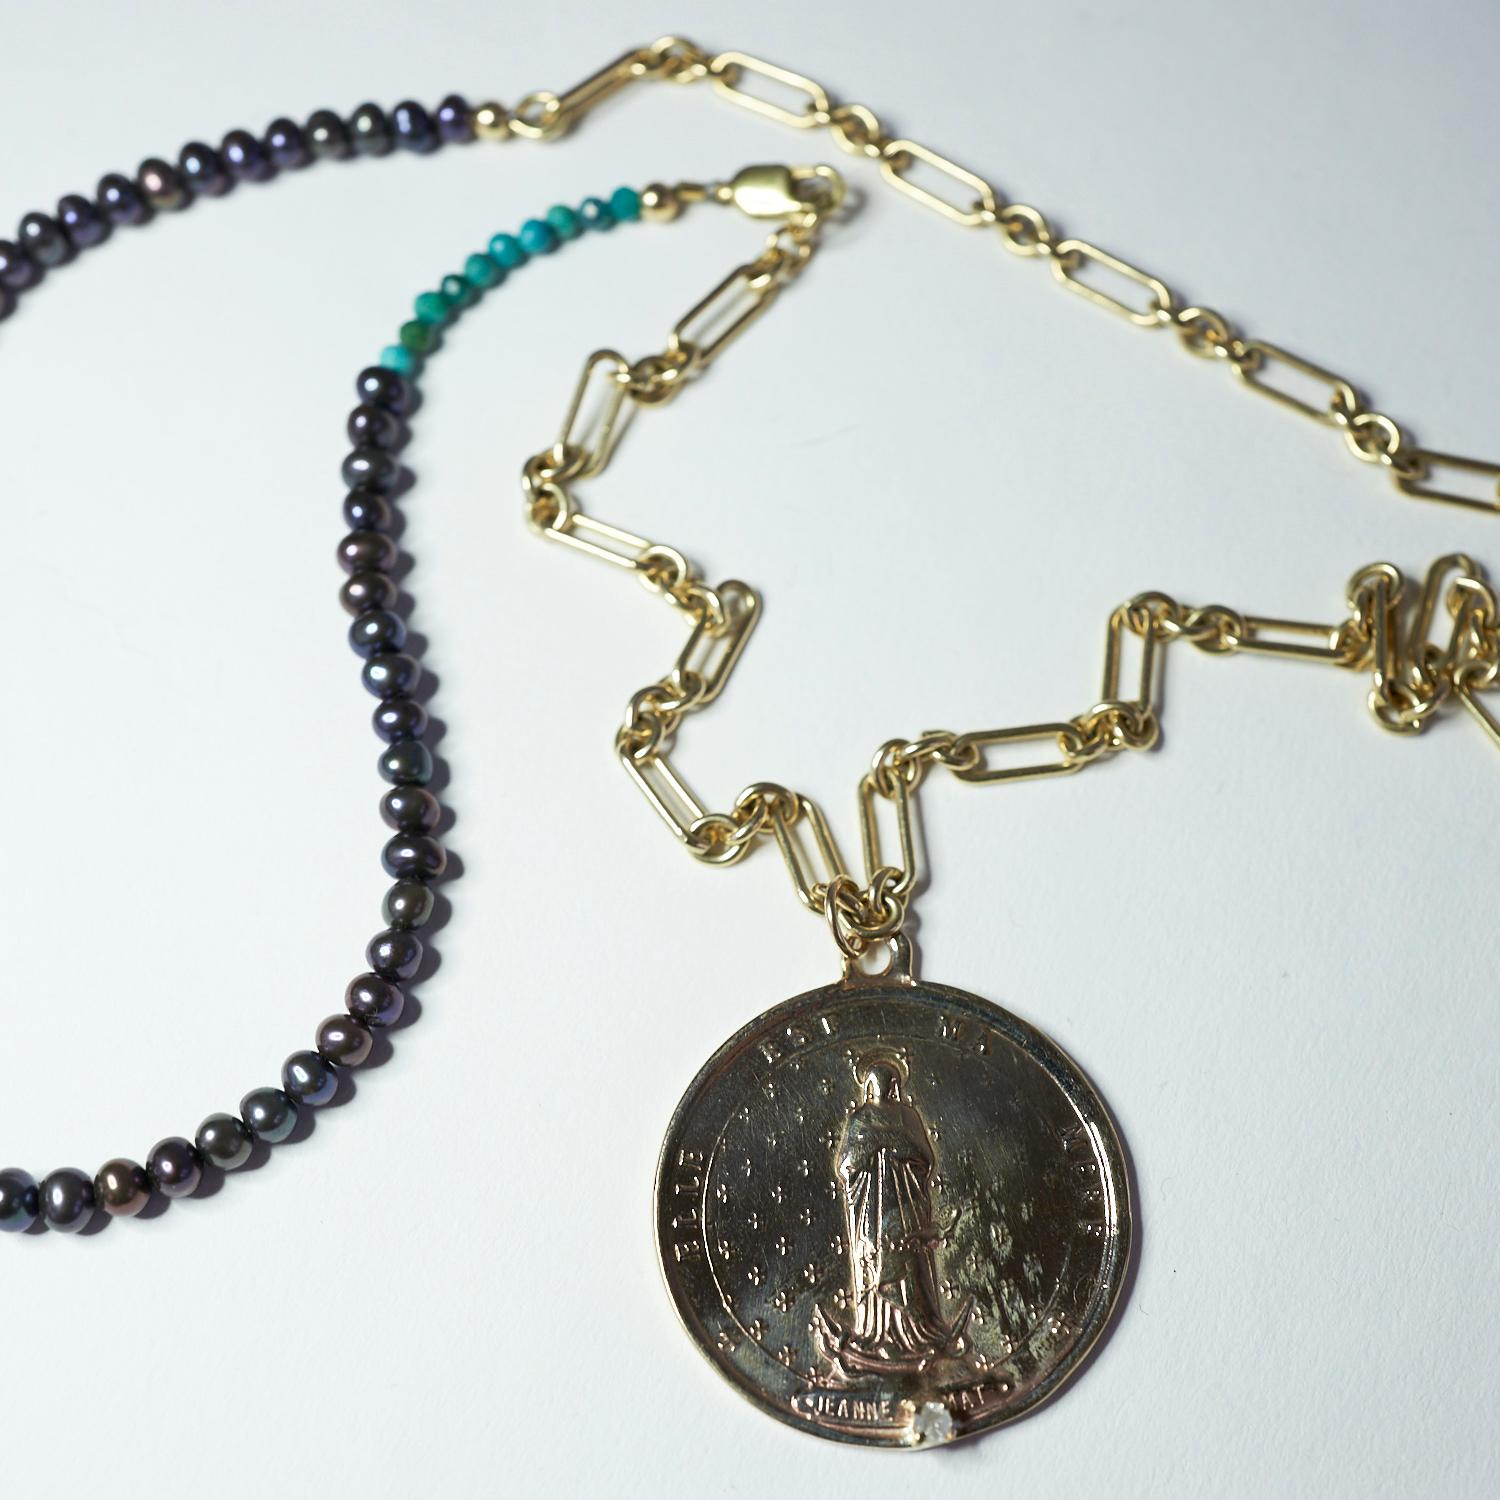 Raw Diamond Black Pearl Medal Coin Pendant Long Chain Necklace Turquoise Bead J Dauphin

Exclusive piece with a Round Medal Coin with French Saint Jeanne Le Mat in Bronze and a Raw Diamond set in a Gold prong hanging on a Black Pearl Turquoise gold